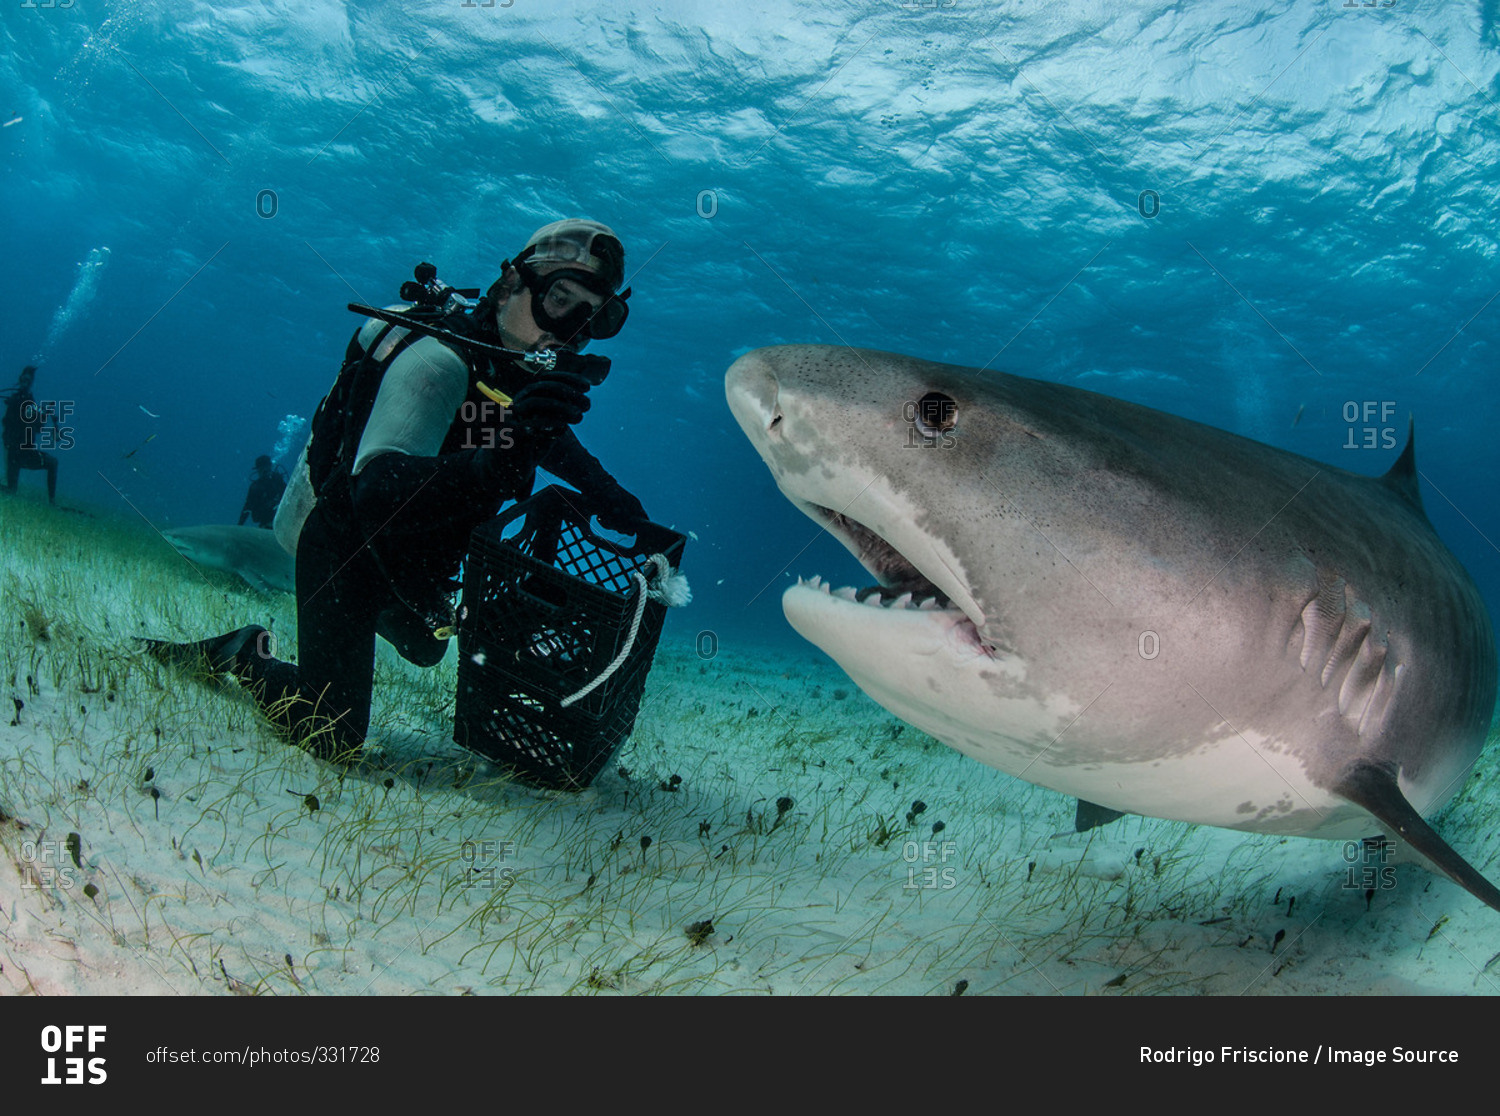 Underwater view of scuba diver on seabed feeding tiger shark, Tiger Beach, Bahamas